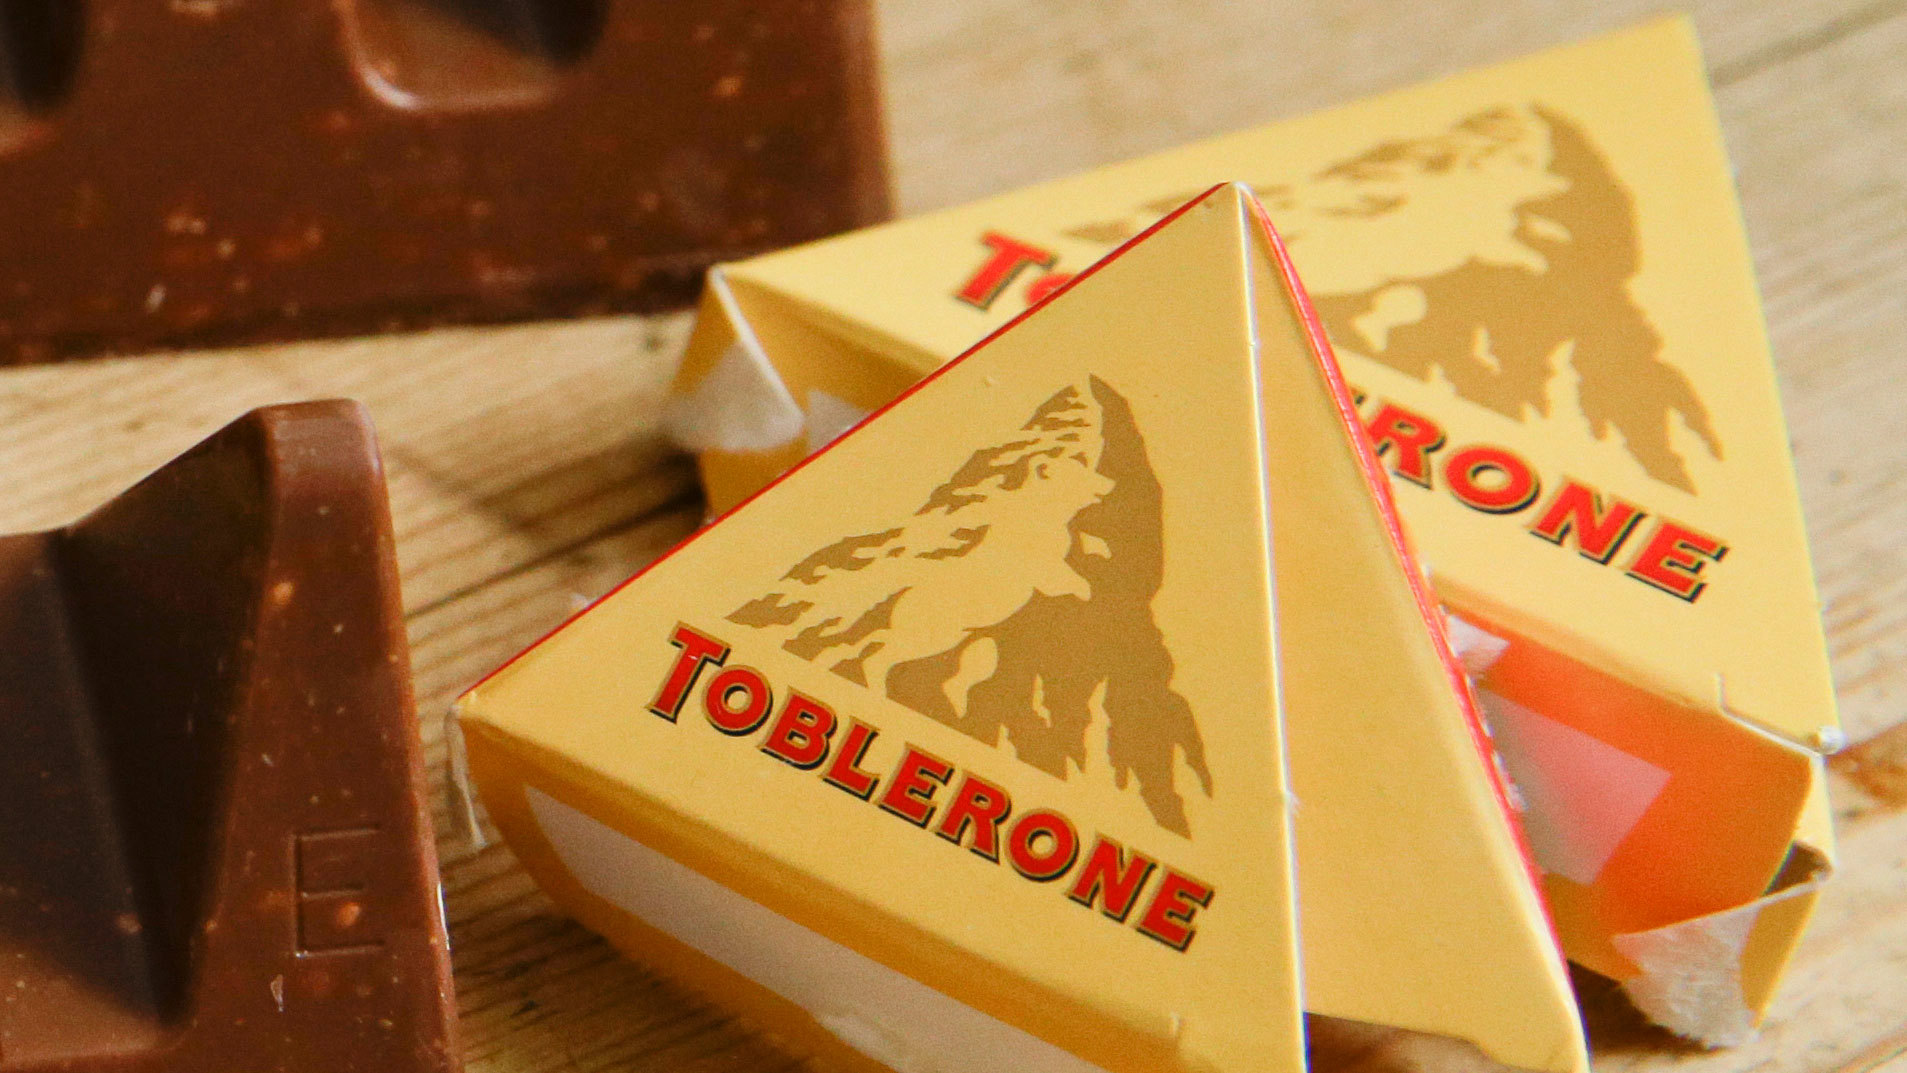 Toblerone forced to replace iconic Matterhorn on packaging